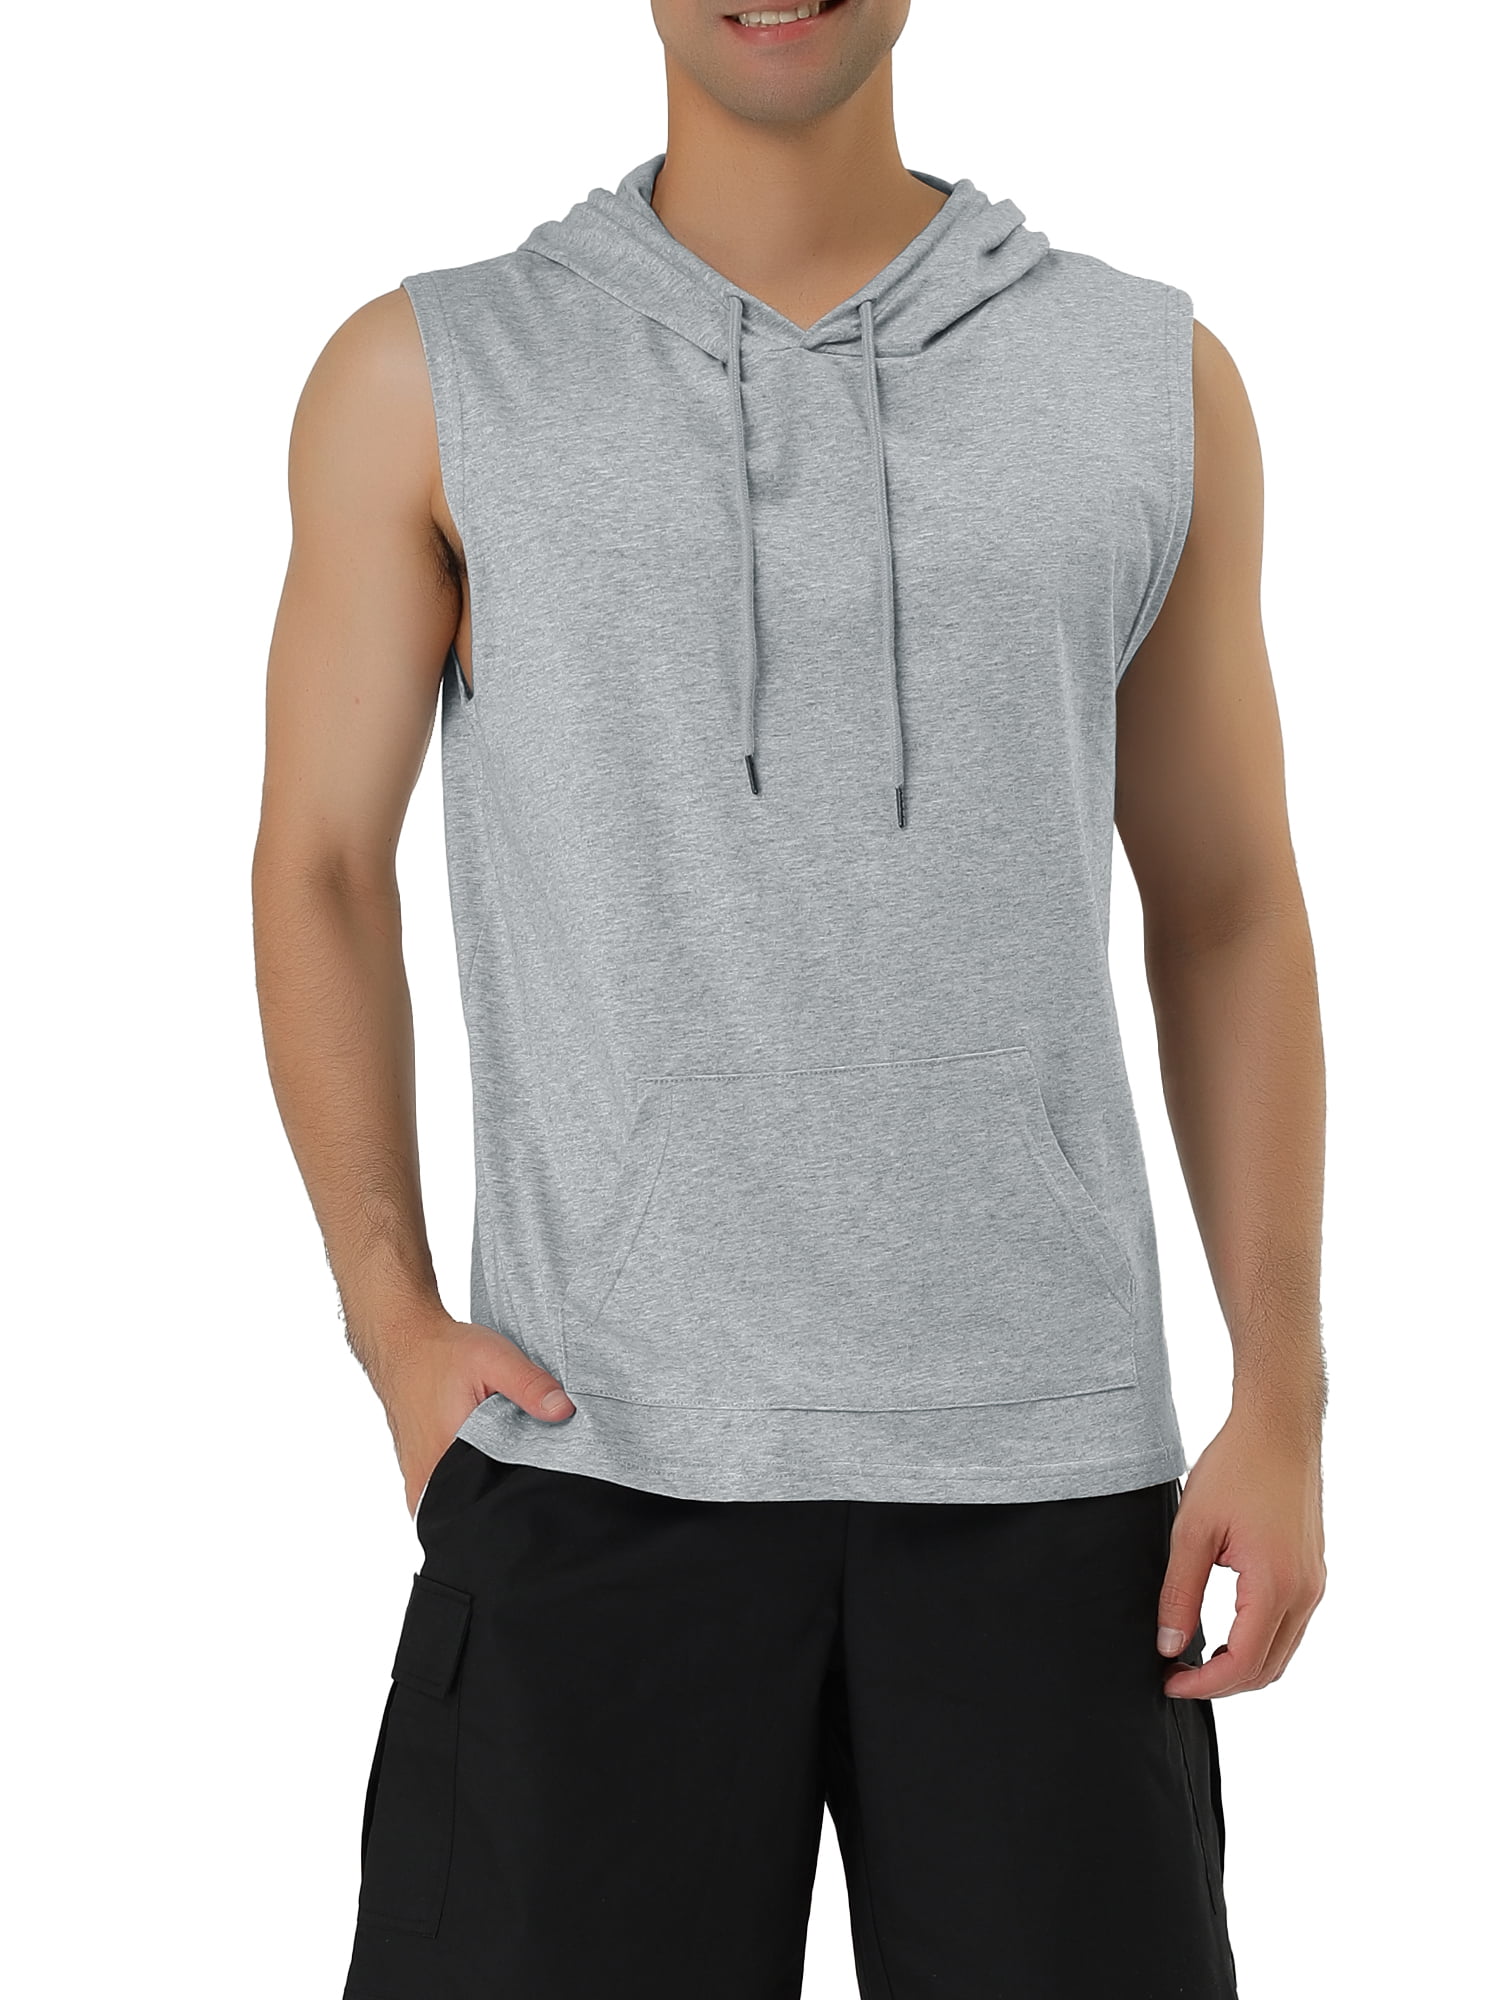 Lars Amadeus Men's Tank Tops with Hood Gym Athletic Muscle Shirts ...